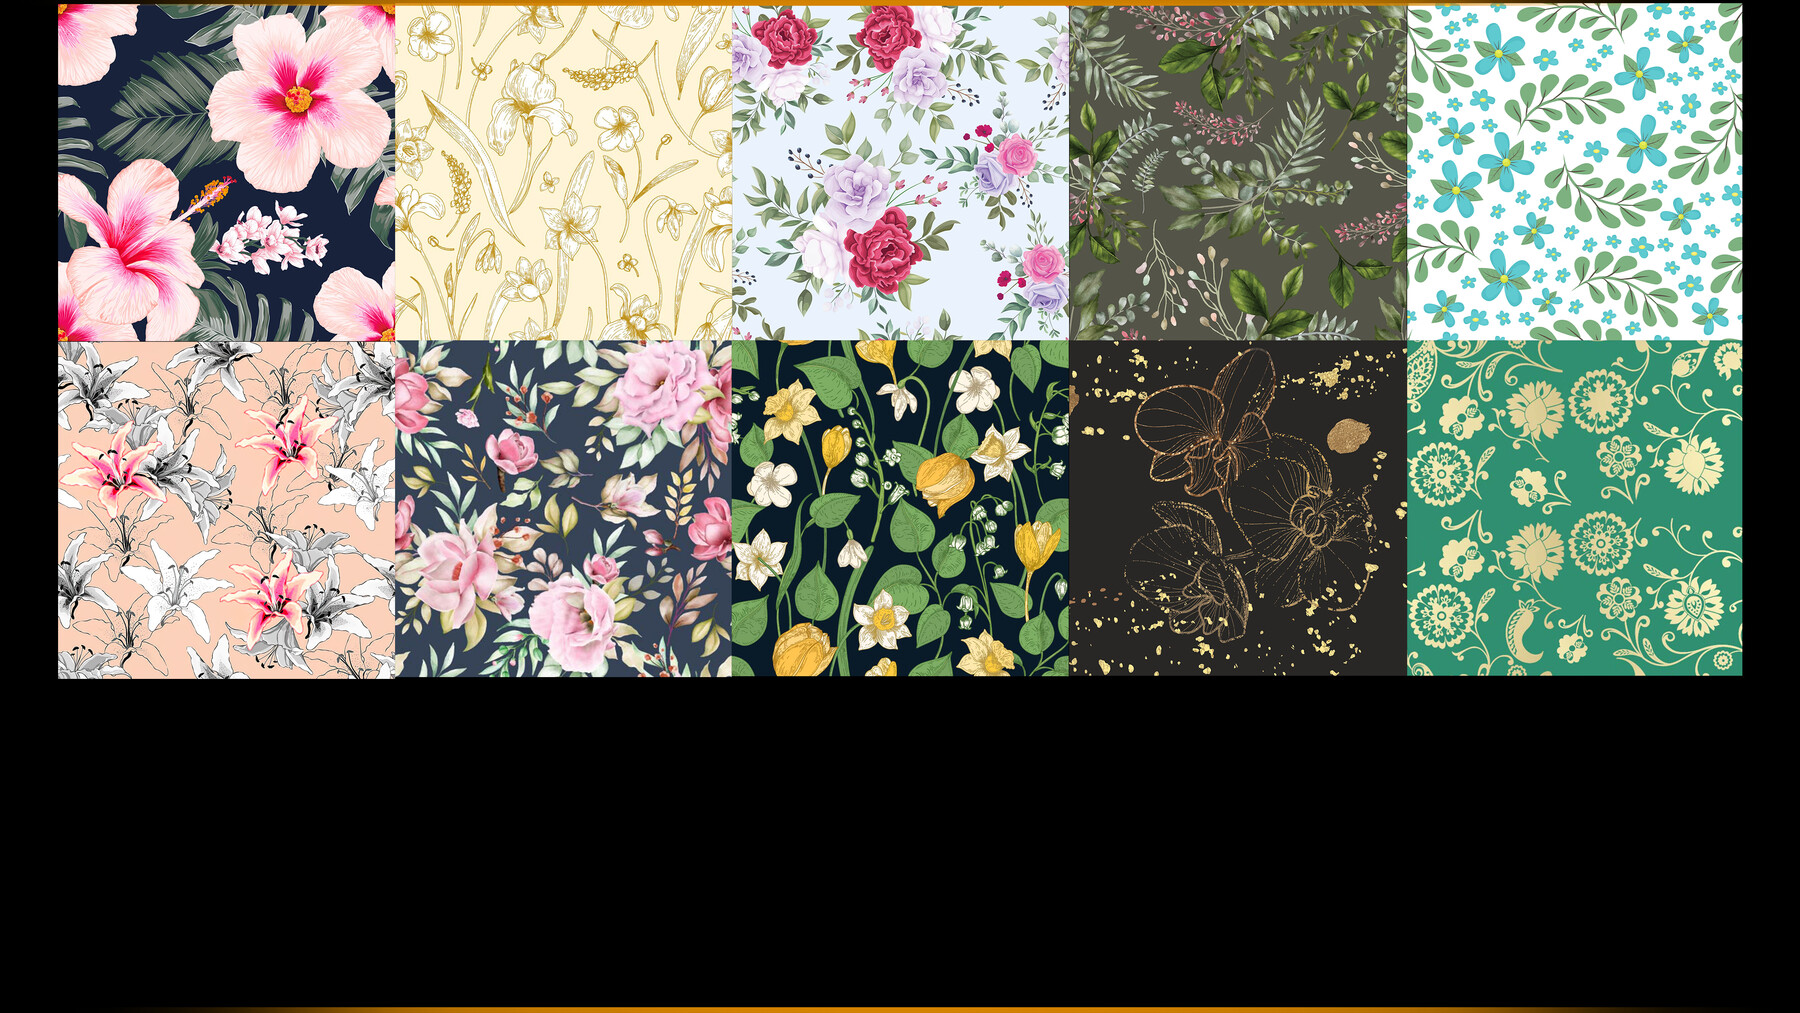 ArtStation - Floral Pattern for Fabric: Exploring the Beauty of